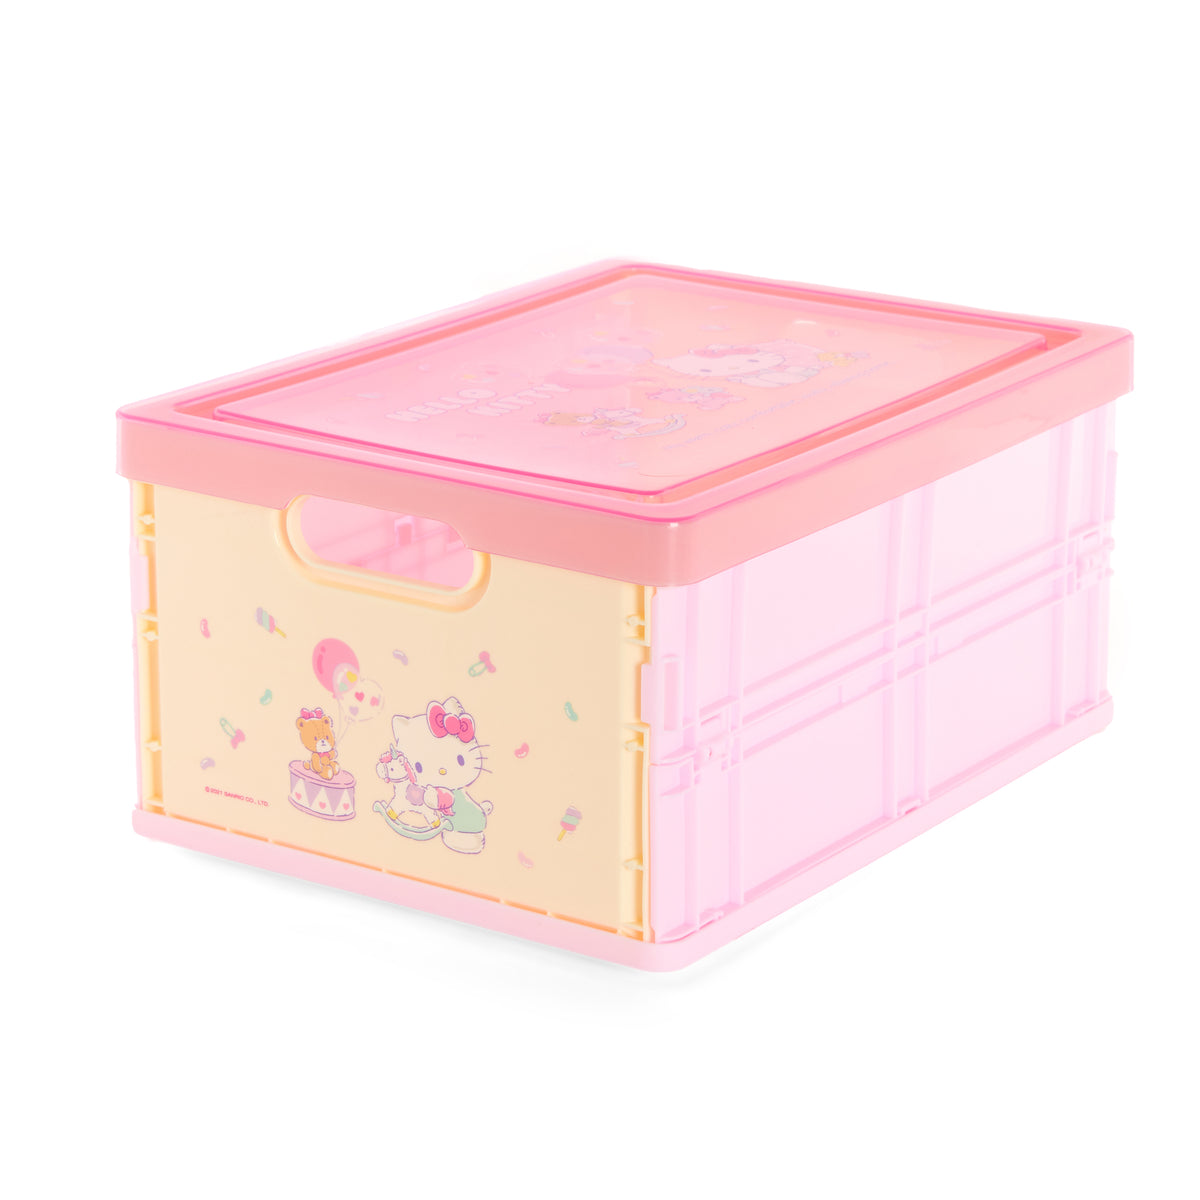 Hello Kitty Chest With Cabinet Accessory Case Cute Storage Box Sanrio Japan